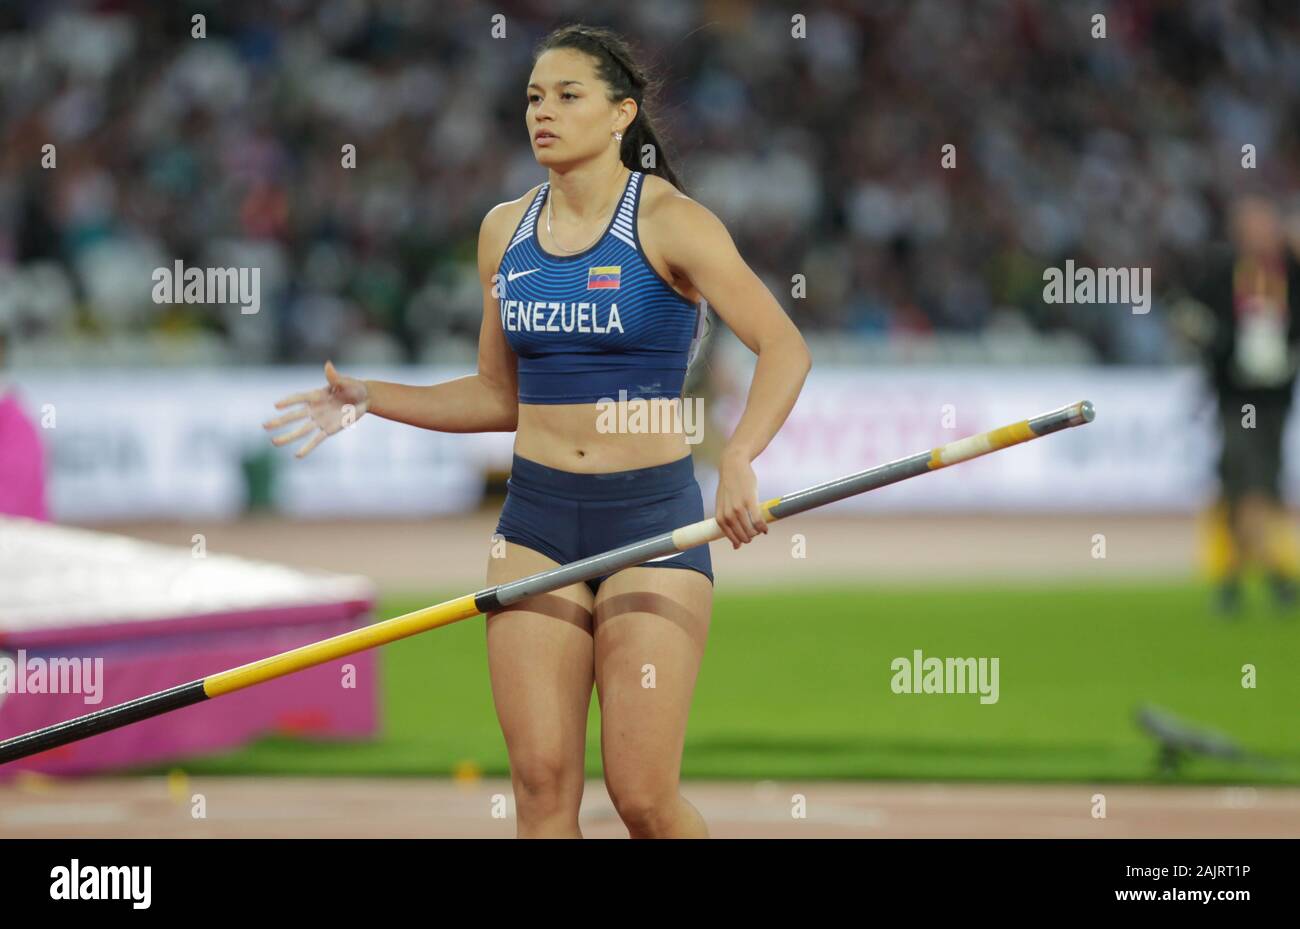 Robeilys Peinado (Venezuela) at the Women's Pole Vault Final of the IAAF World Championships in Athletics on August 6, 201st at the Olympic Stadium in London, Great Britain Stock Photo